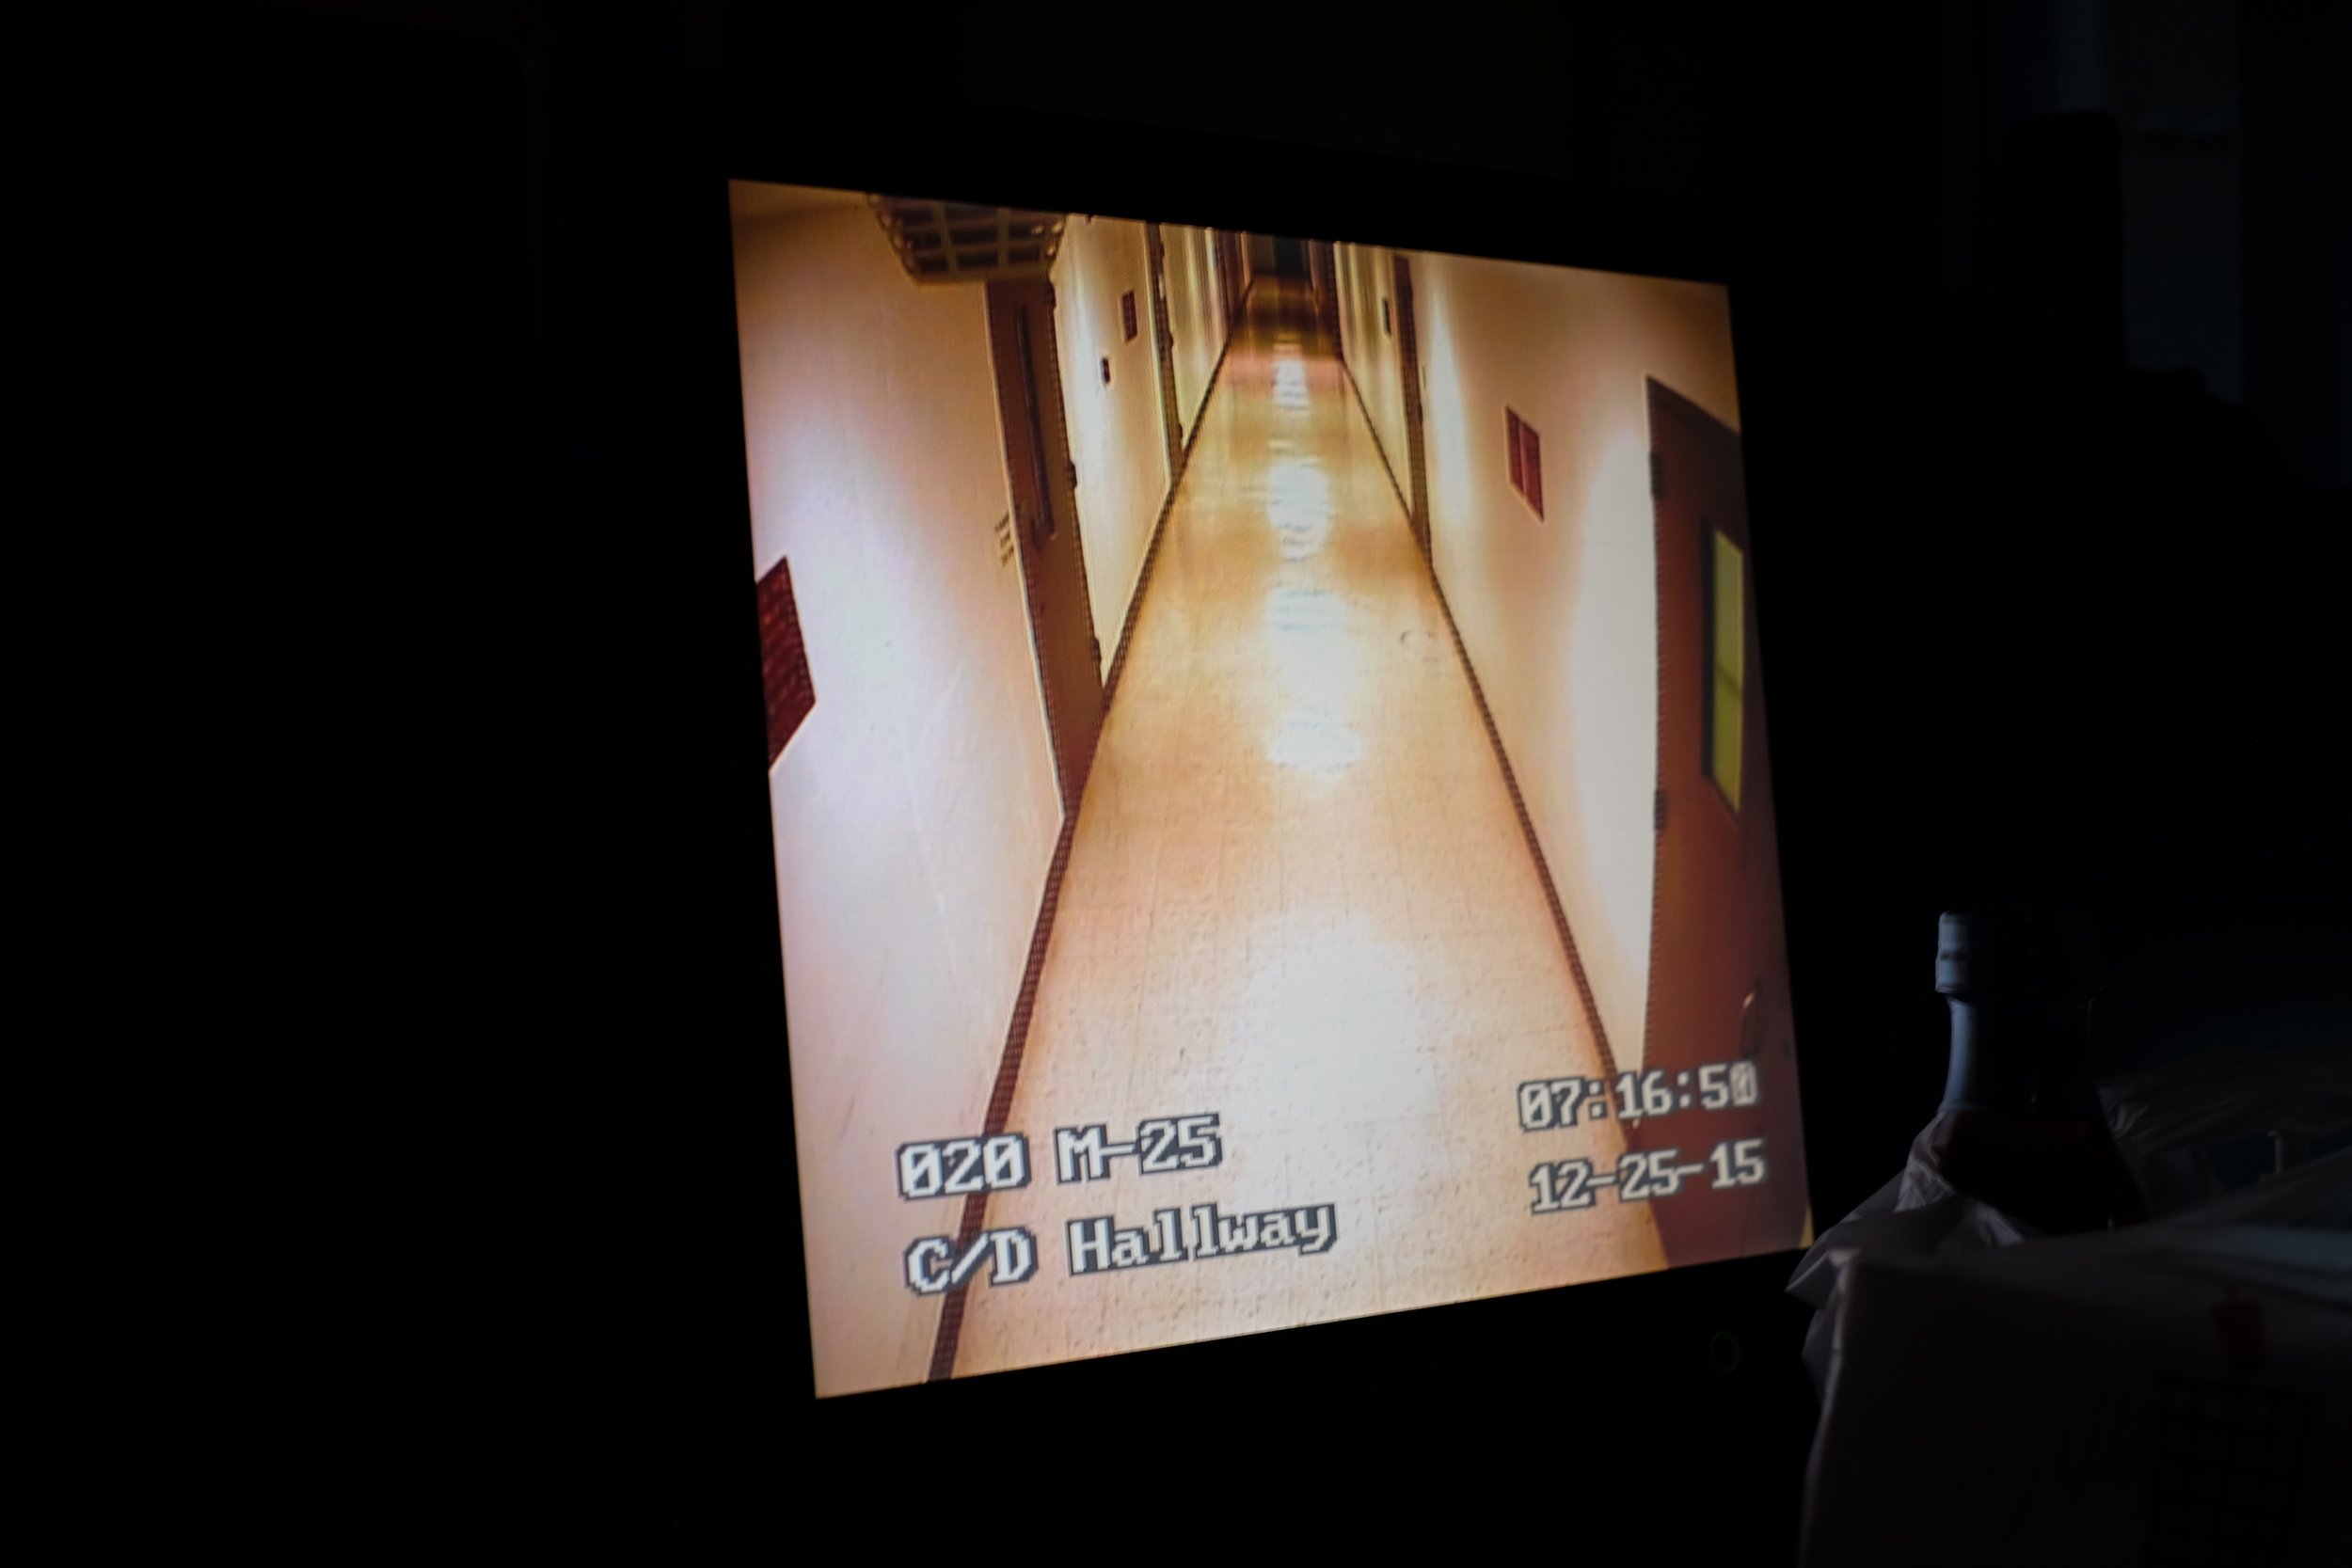  A screen shows one of the main hallways in the Midland County jail on Christmas Day, 2015.&nbsp; 